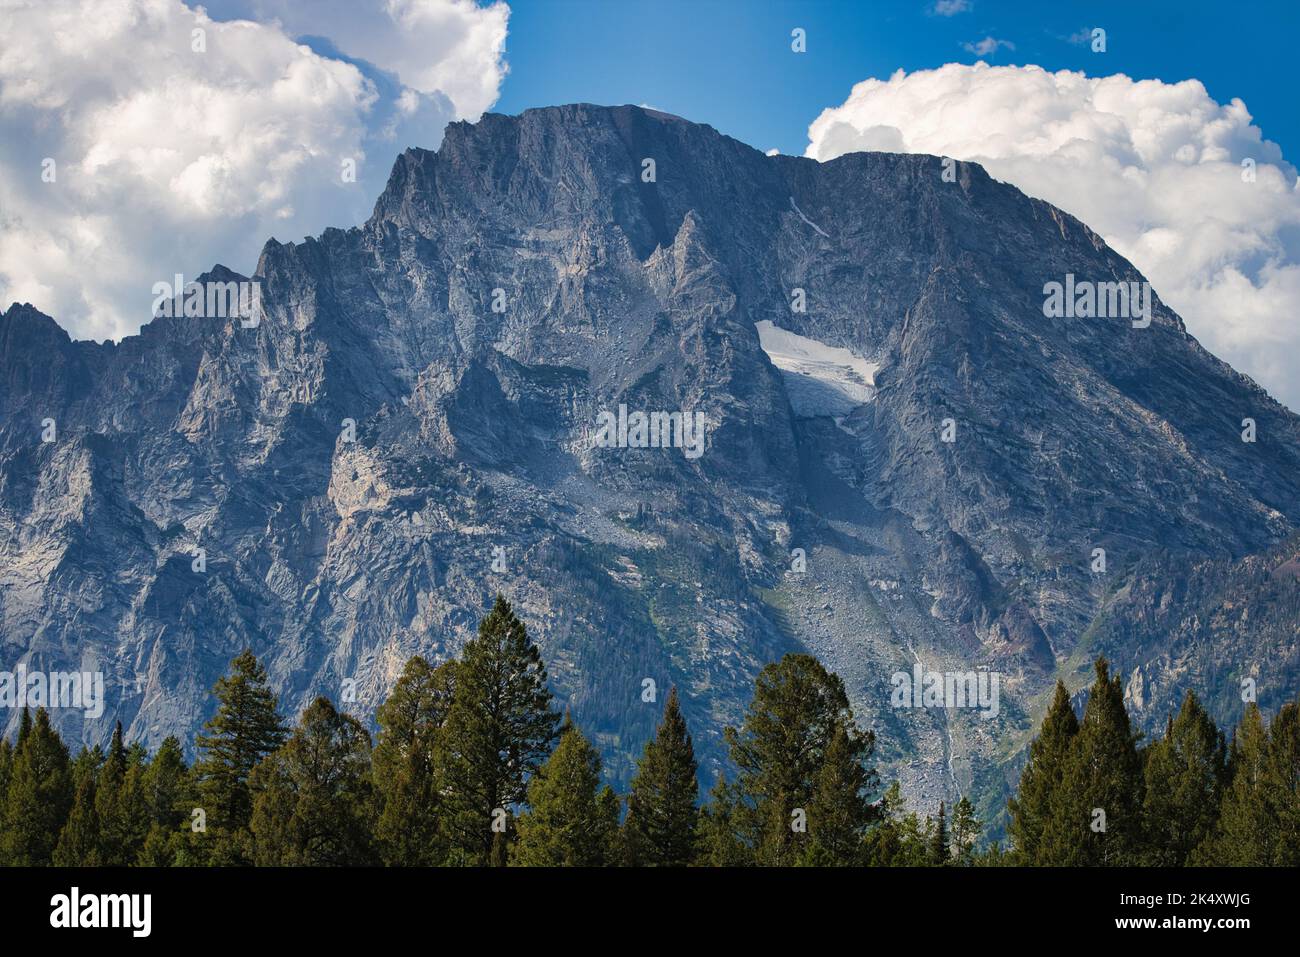 Landscape view of Mount Moran towering over a forest of evergreen trees in Grand Teton National Park. Taken from Cathedral Group turnout. Stock Photo